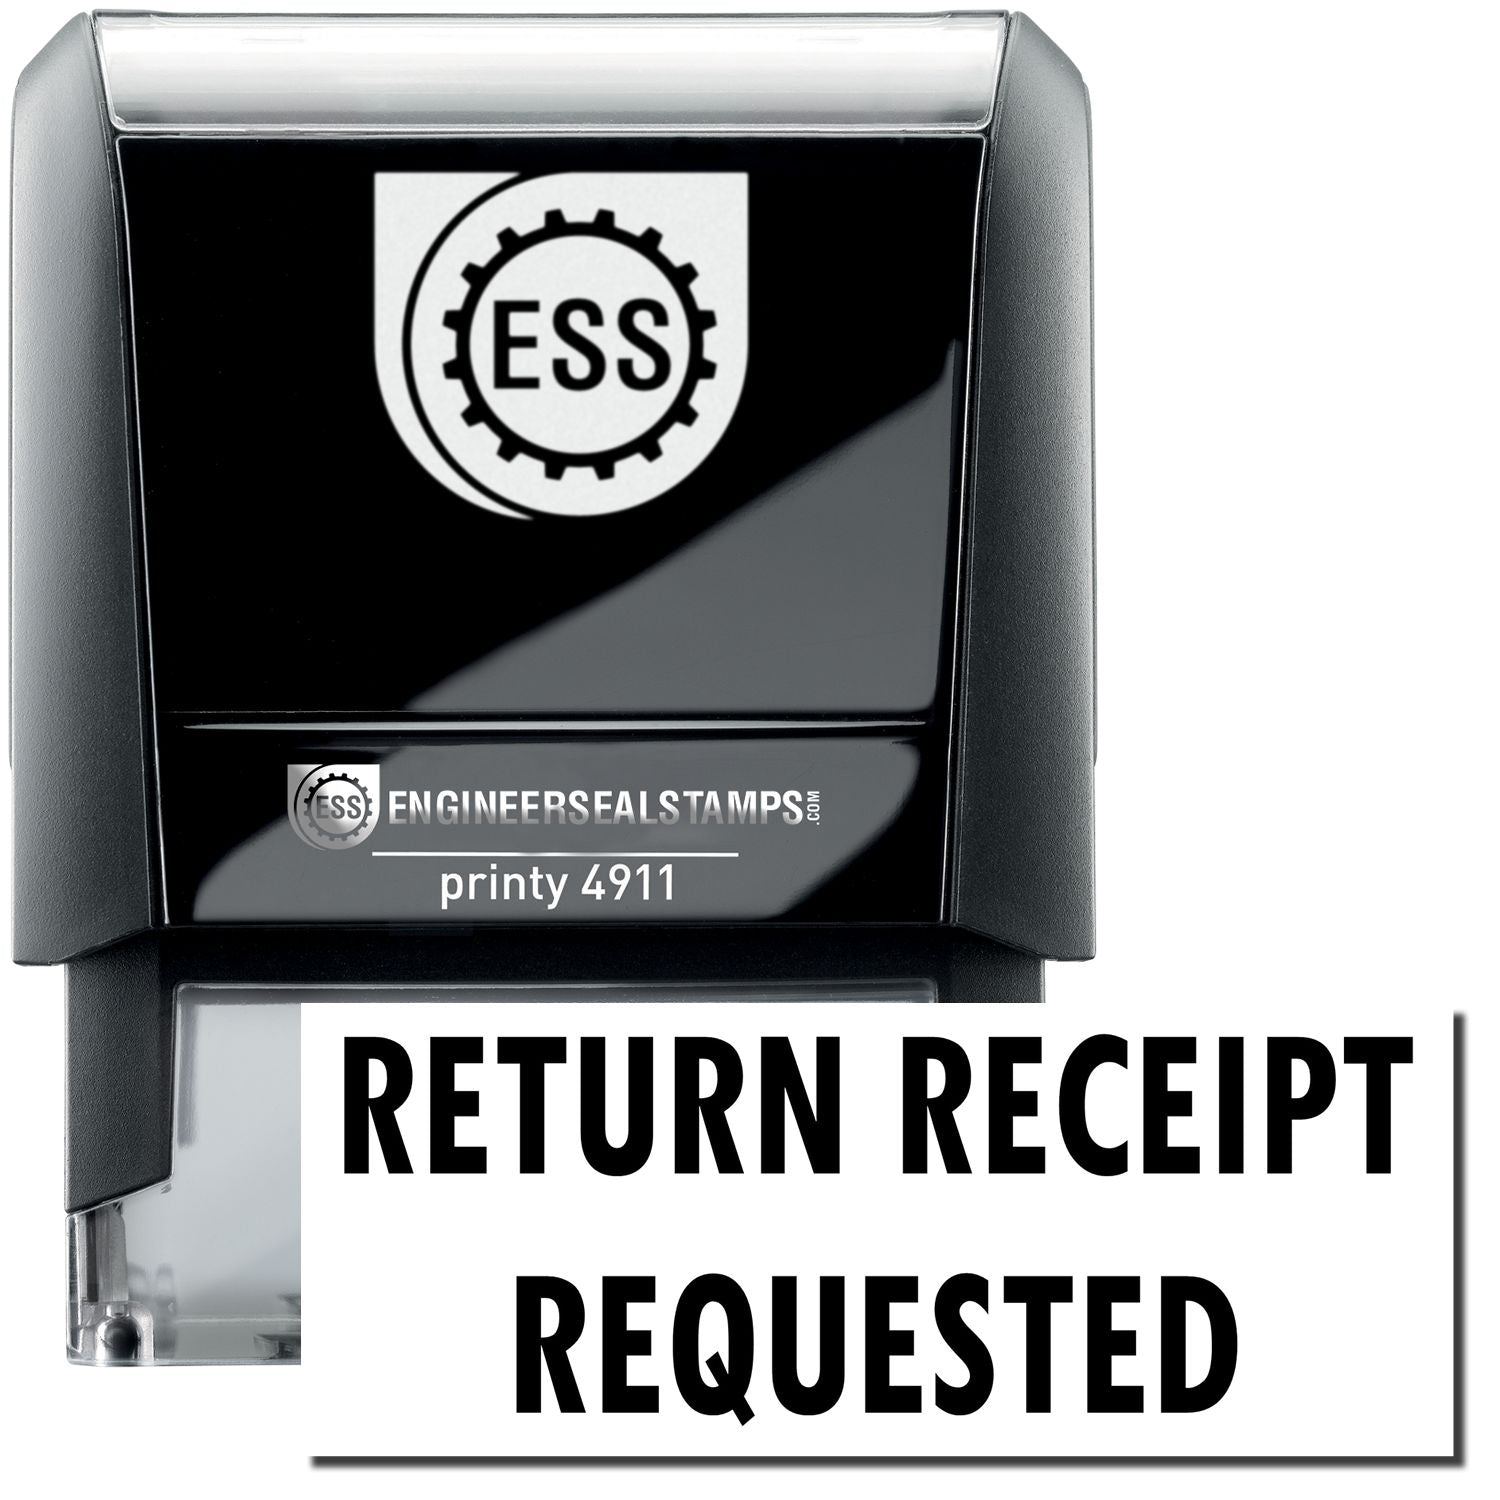 A self-inking stamp with a stamped image showing how the text "RETURN RECEIPT REQUESTED" is displayed after stamping.